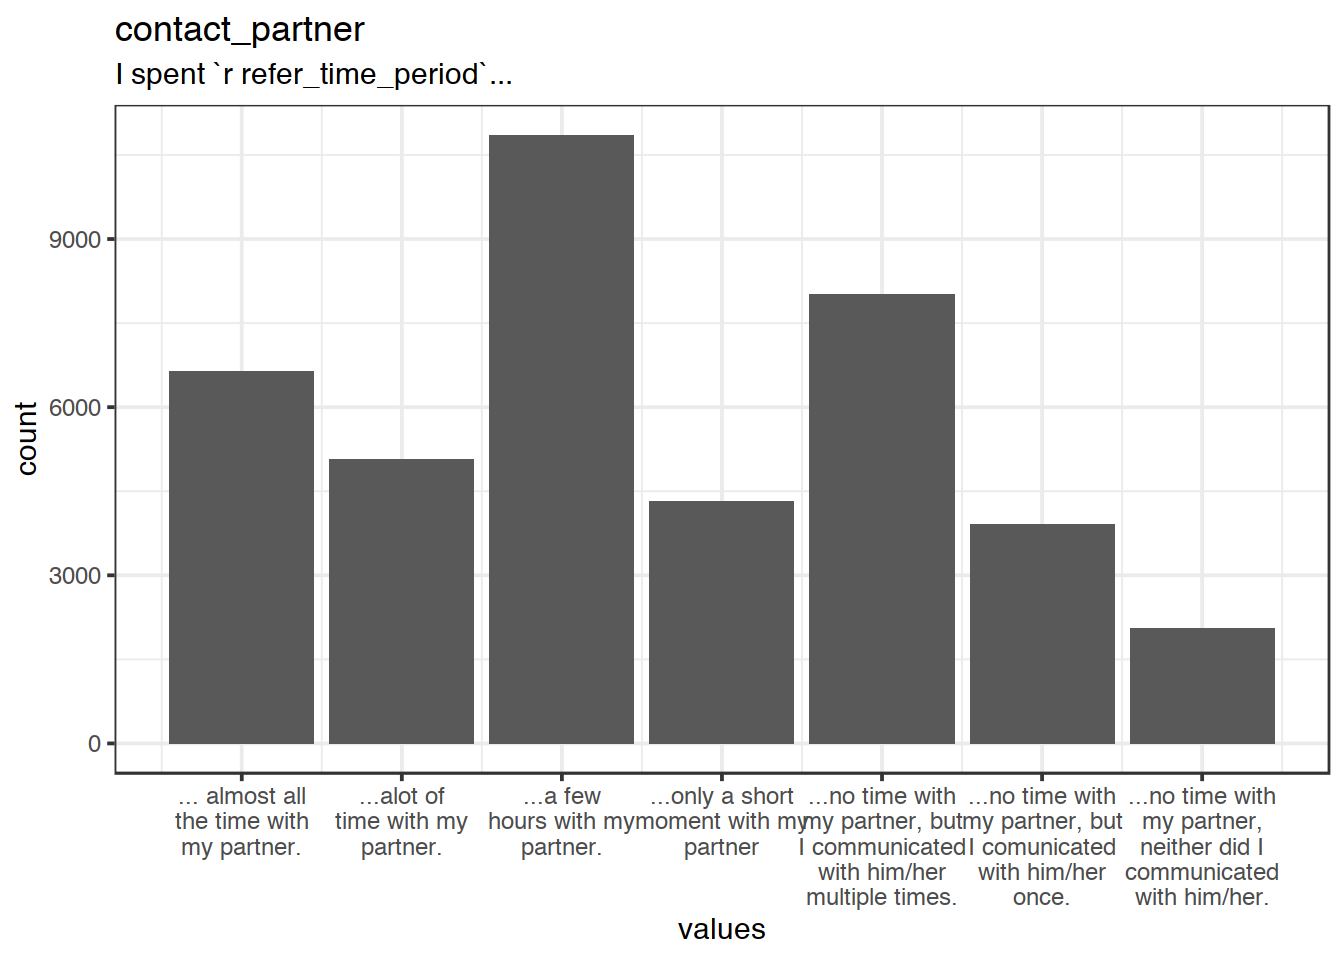 Distribution of values for contact_partner